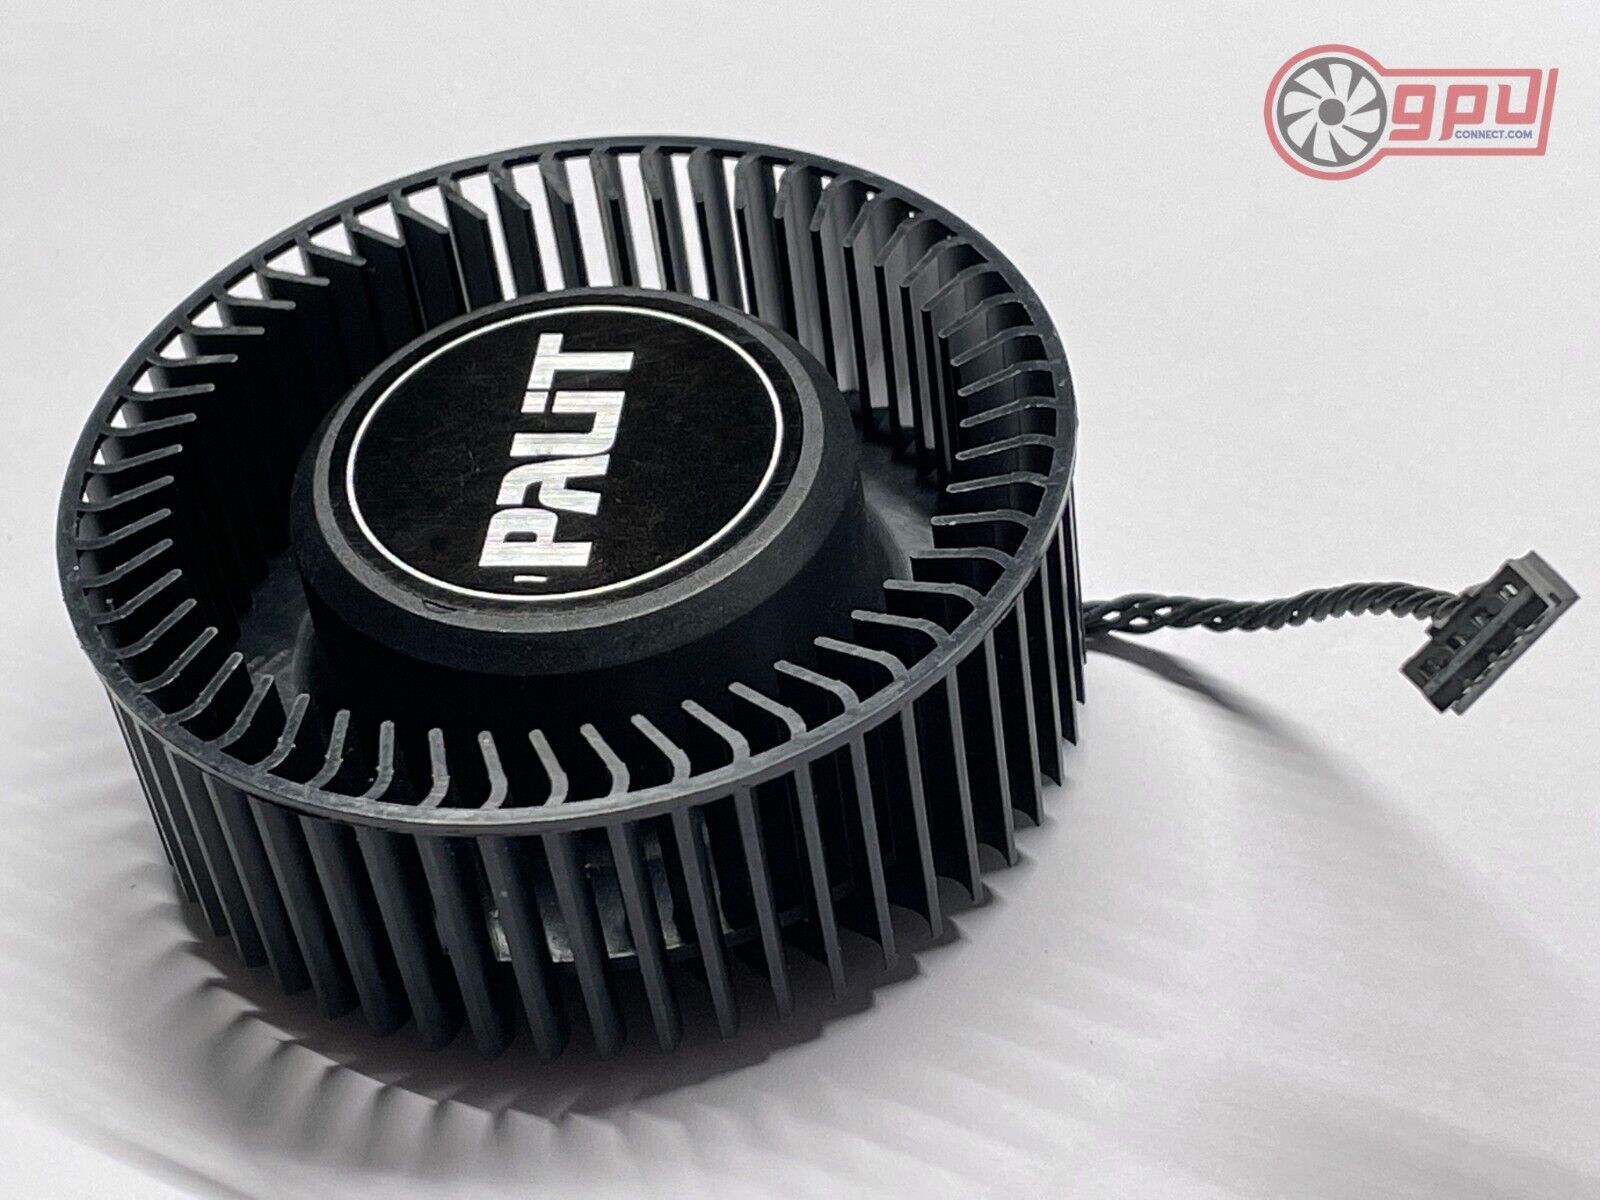 PALIT 2080 Ti Turbine Blower Style RTX Replacement Graphics Card Fan (4 Pin) - GPUCONNECT.COM